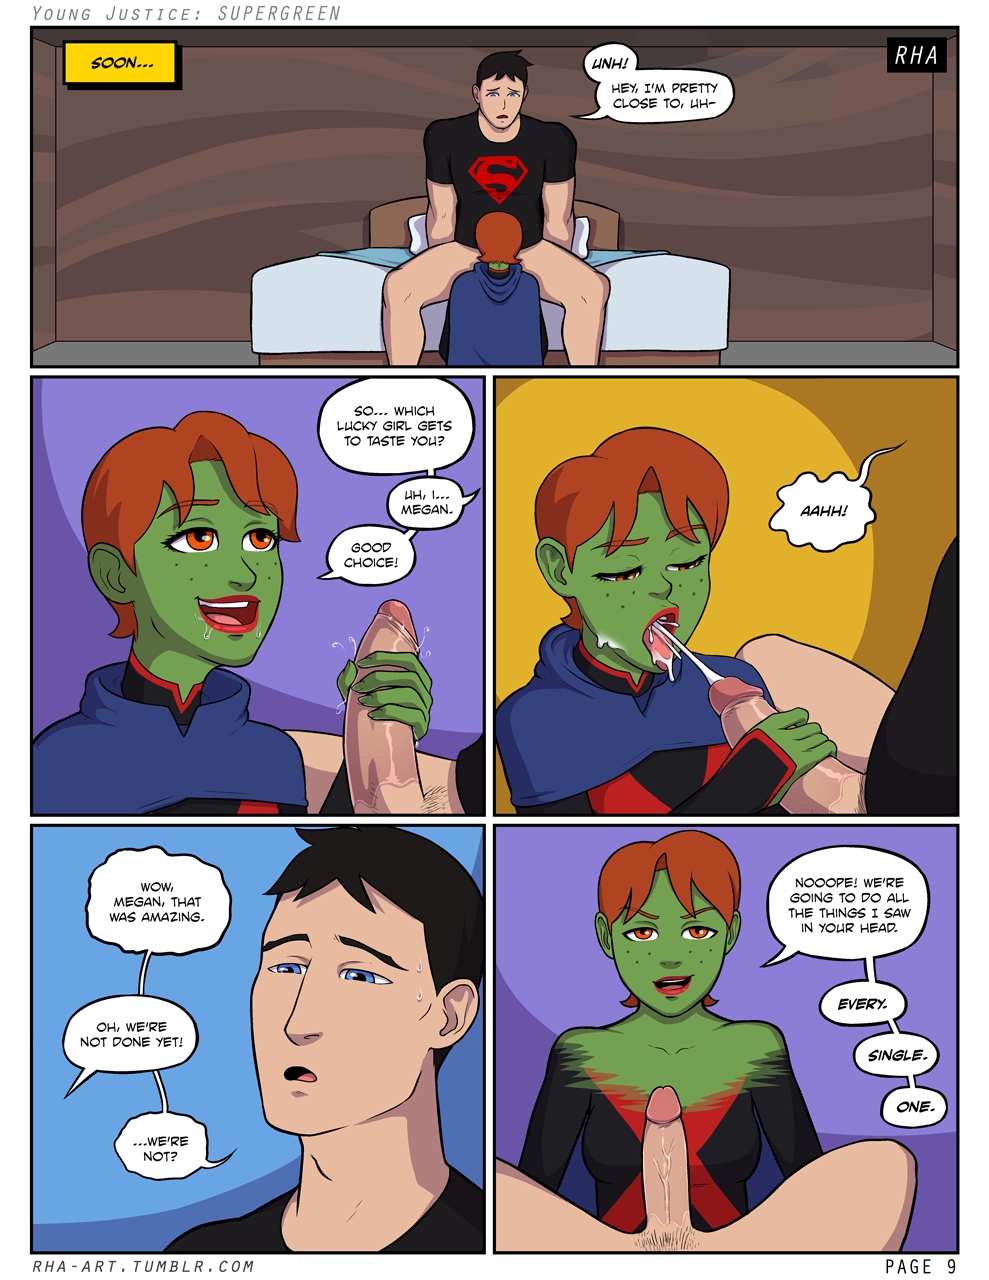 [Rha] Young Justice: Supergreen (Young Justice) 9